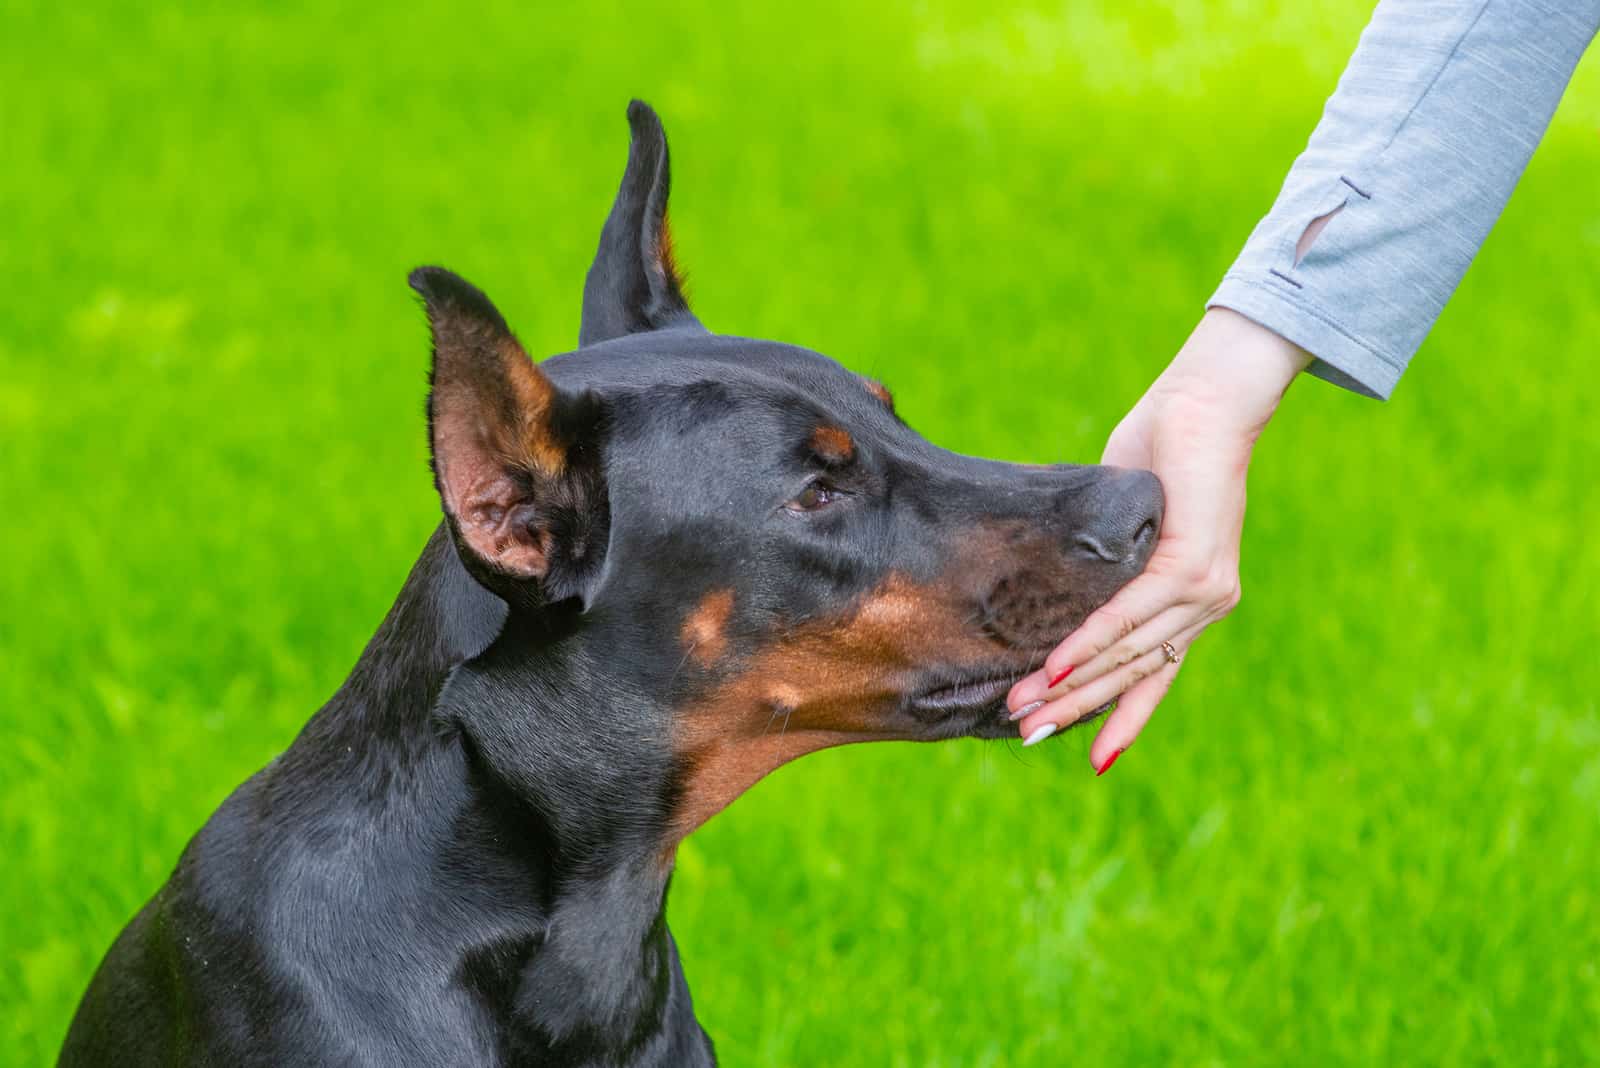 the woman feeds the doberman out of her hand